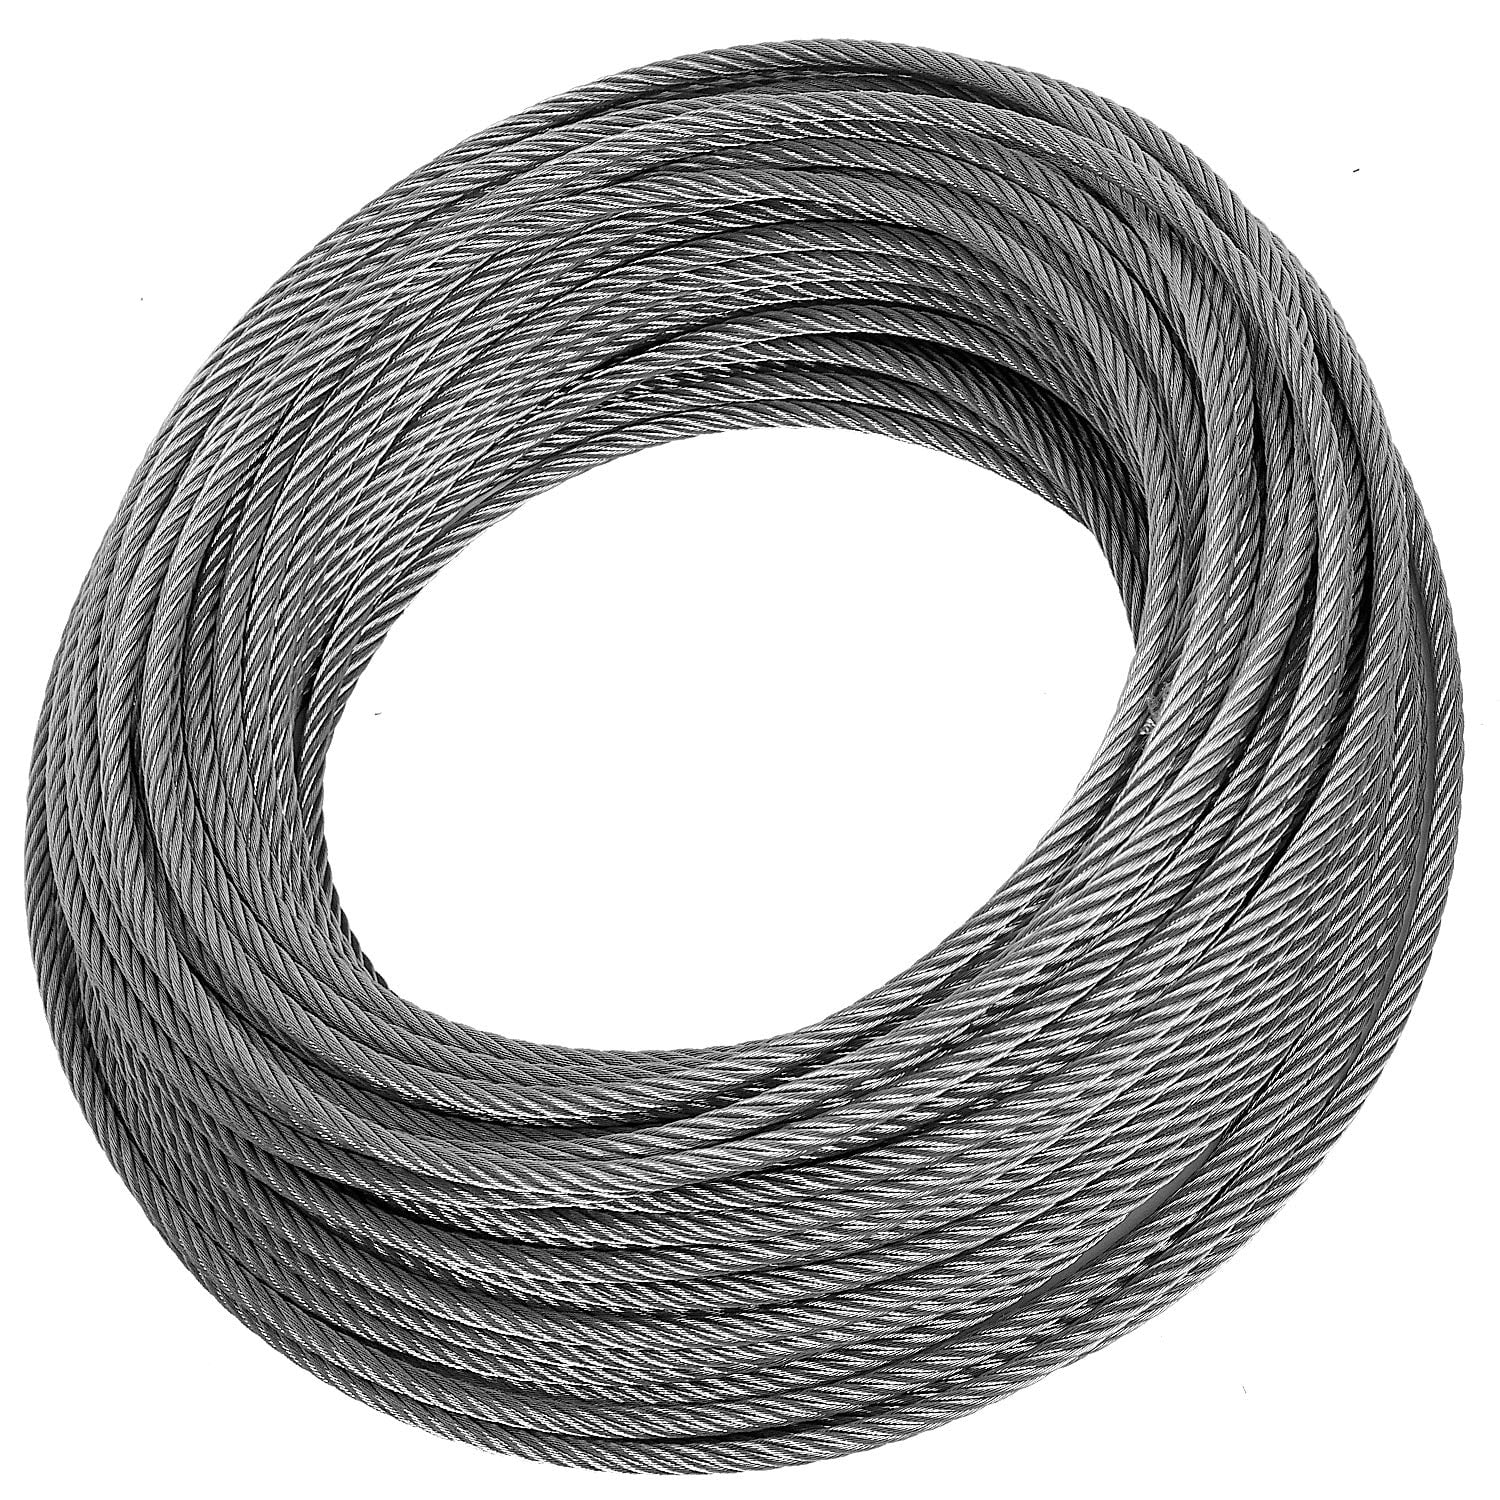 900 Feet 1/4" Stainless Steel Cable Railing Wire Rope 1x19 Type 316 